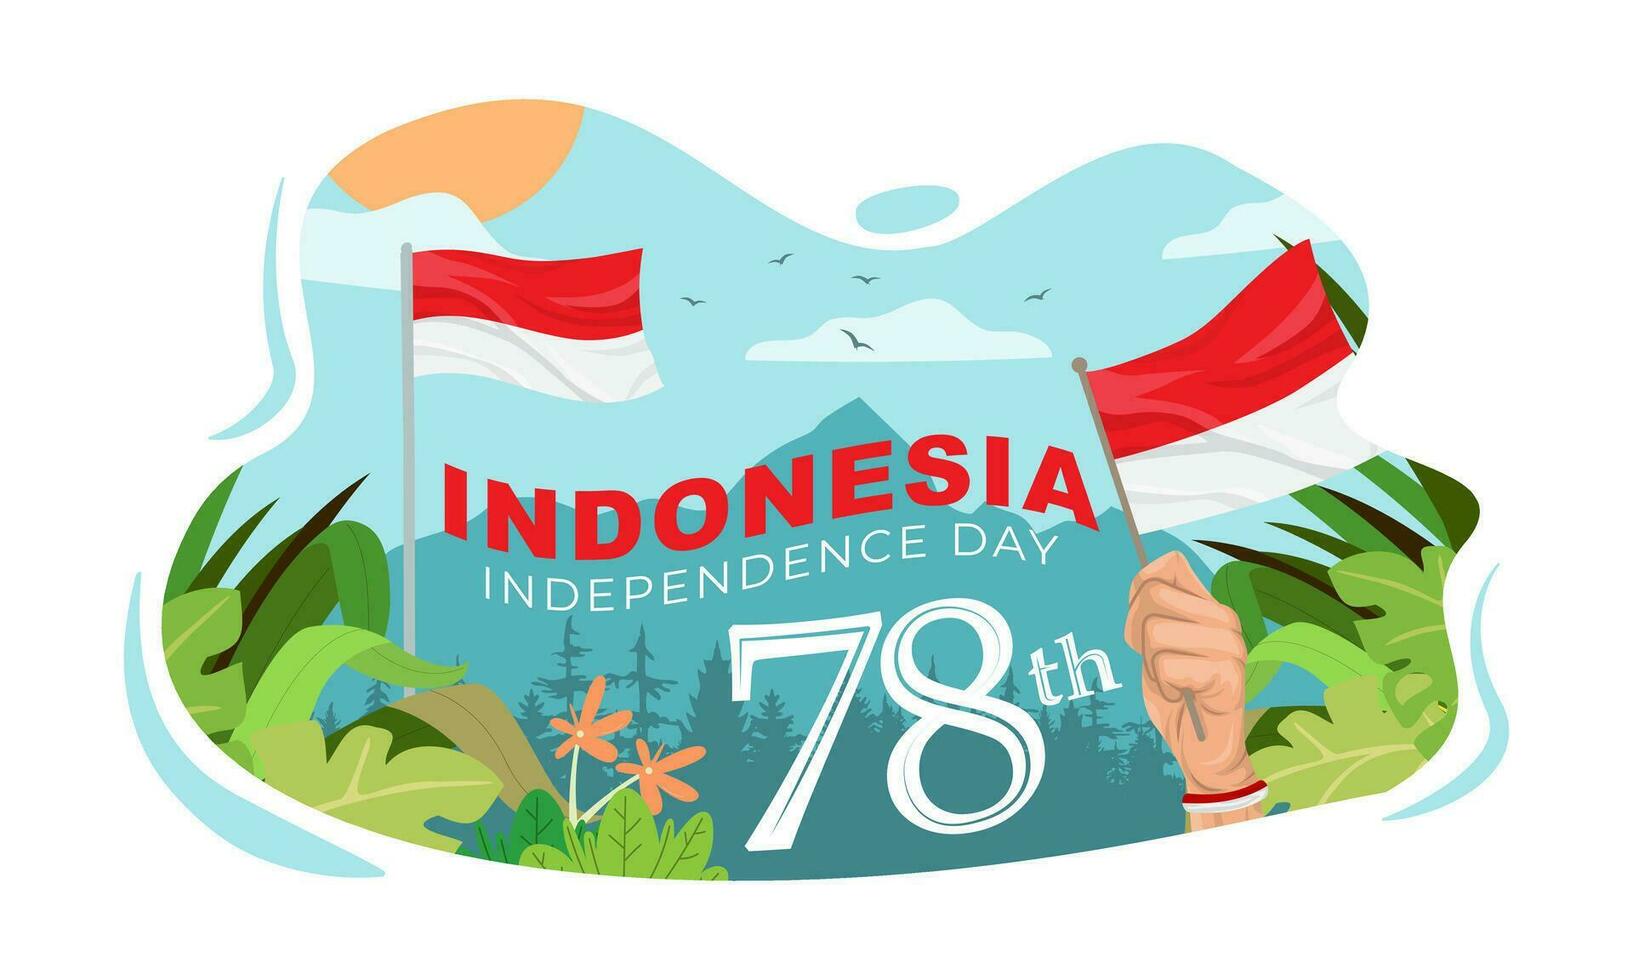 Indonesia independence day greeting flat cartoon design vector